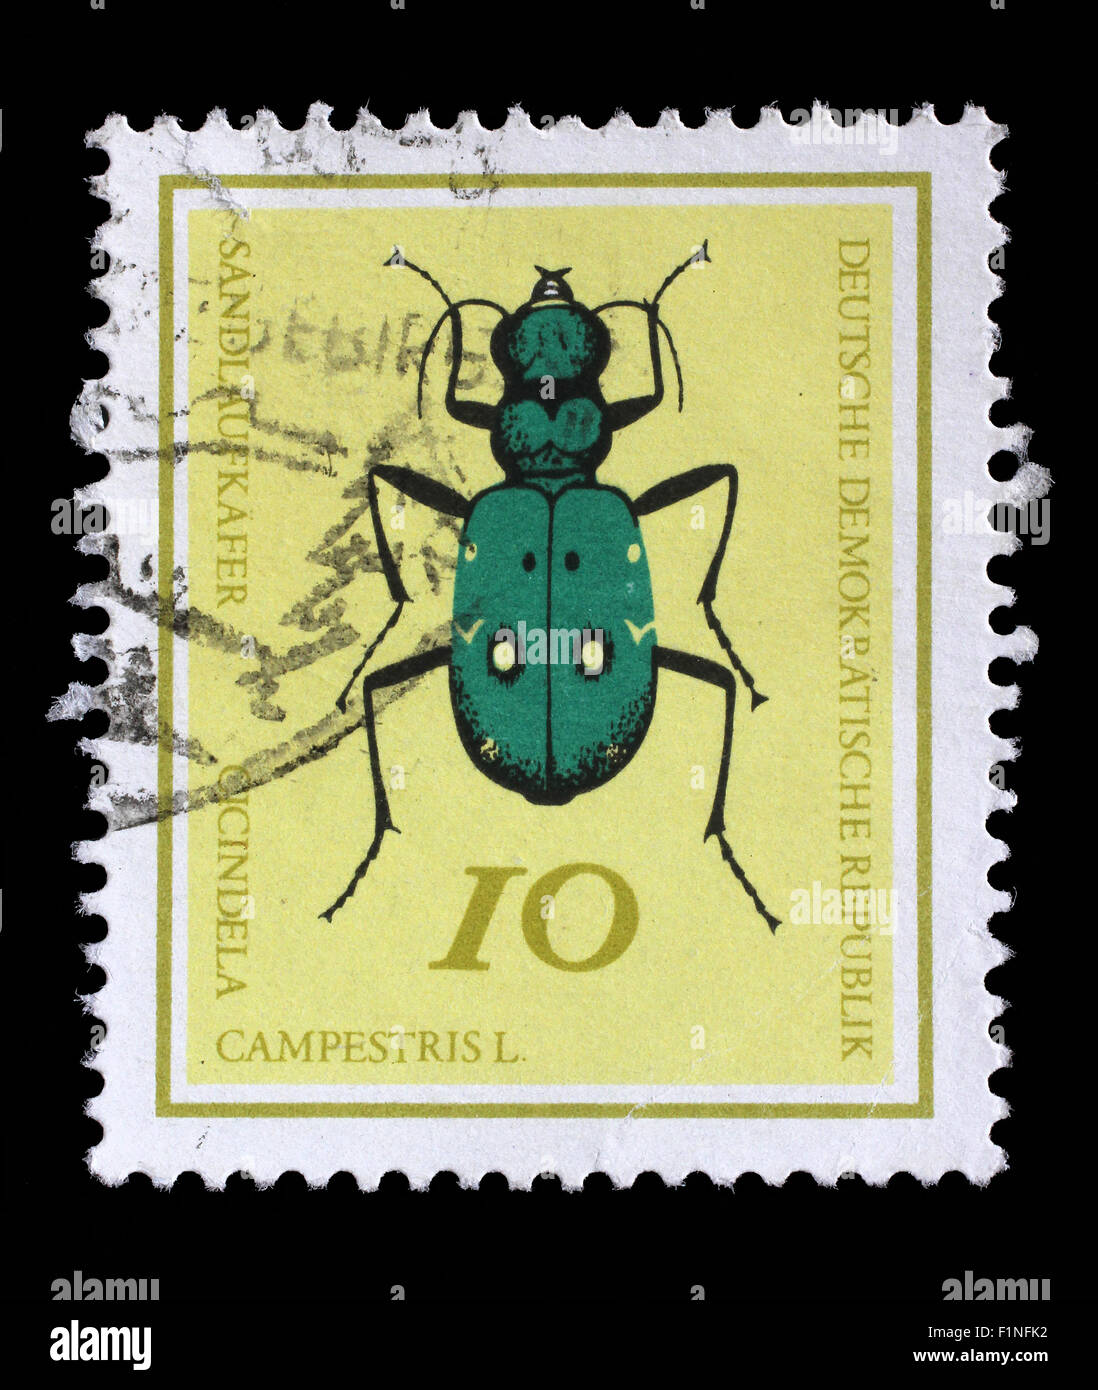 Stamp printed in Germany from the Useful Beetles issue shows Green Tiger beetle (Cicindela campestris), circa 1968. Stock Photo